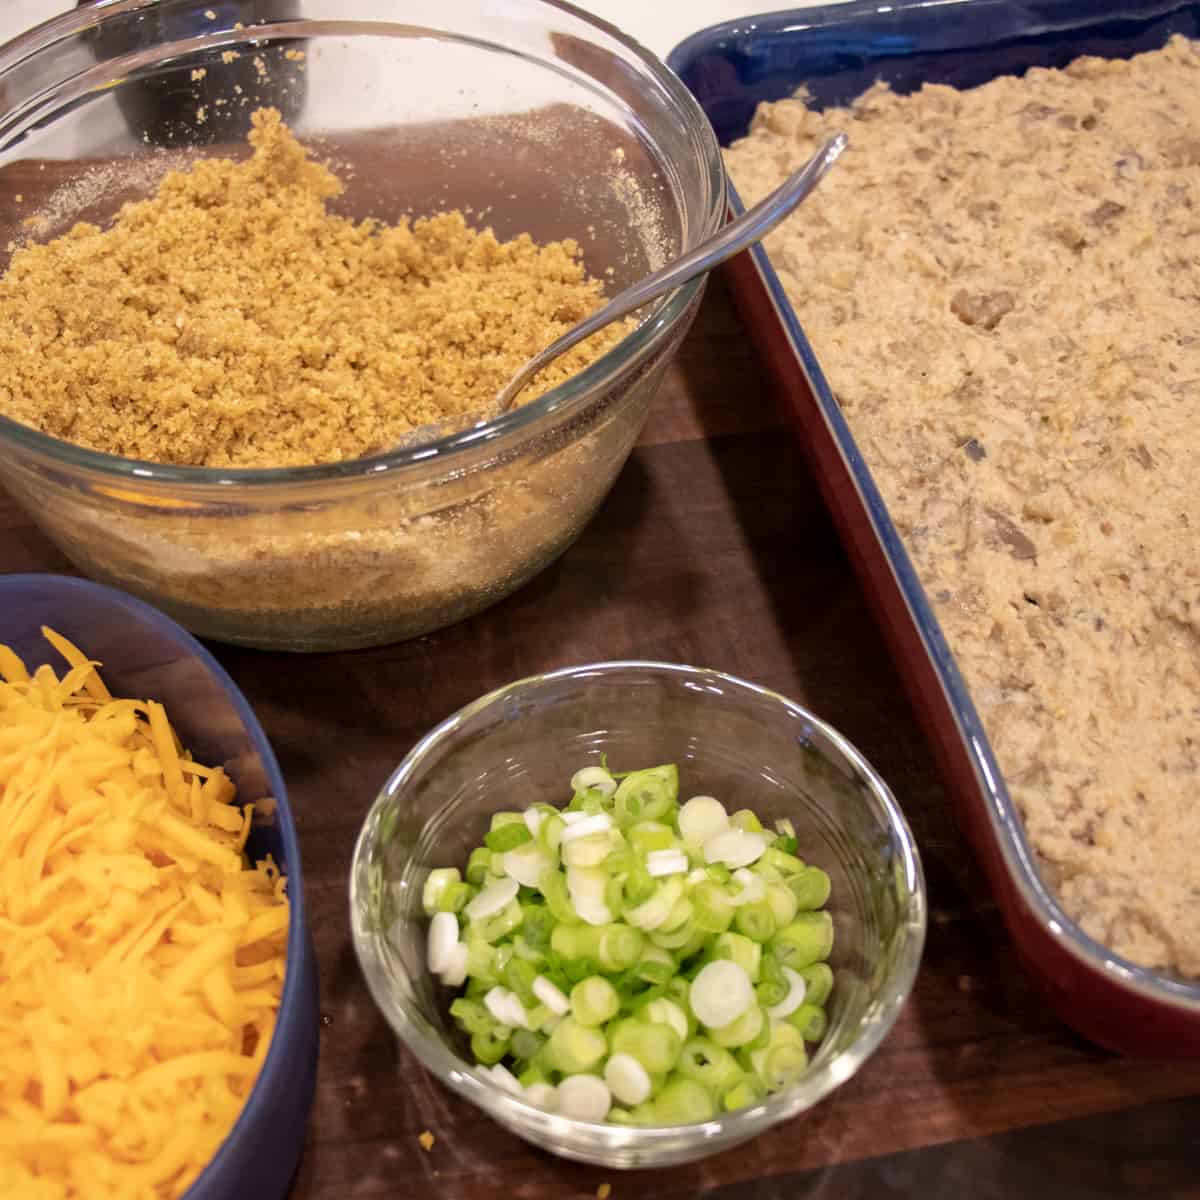 Bowls of grated cheese, sliced onions and bread crumbs.